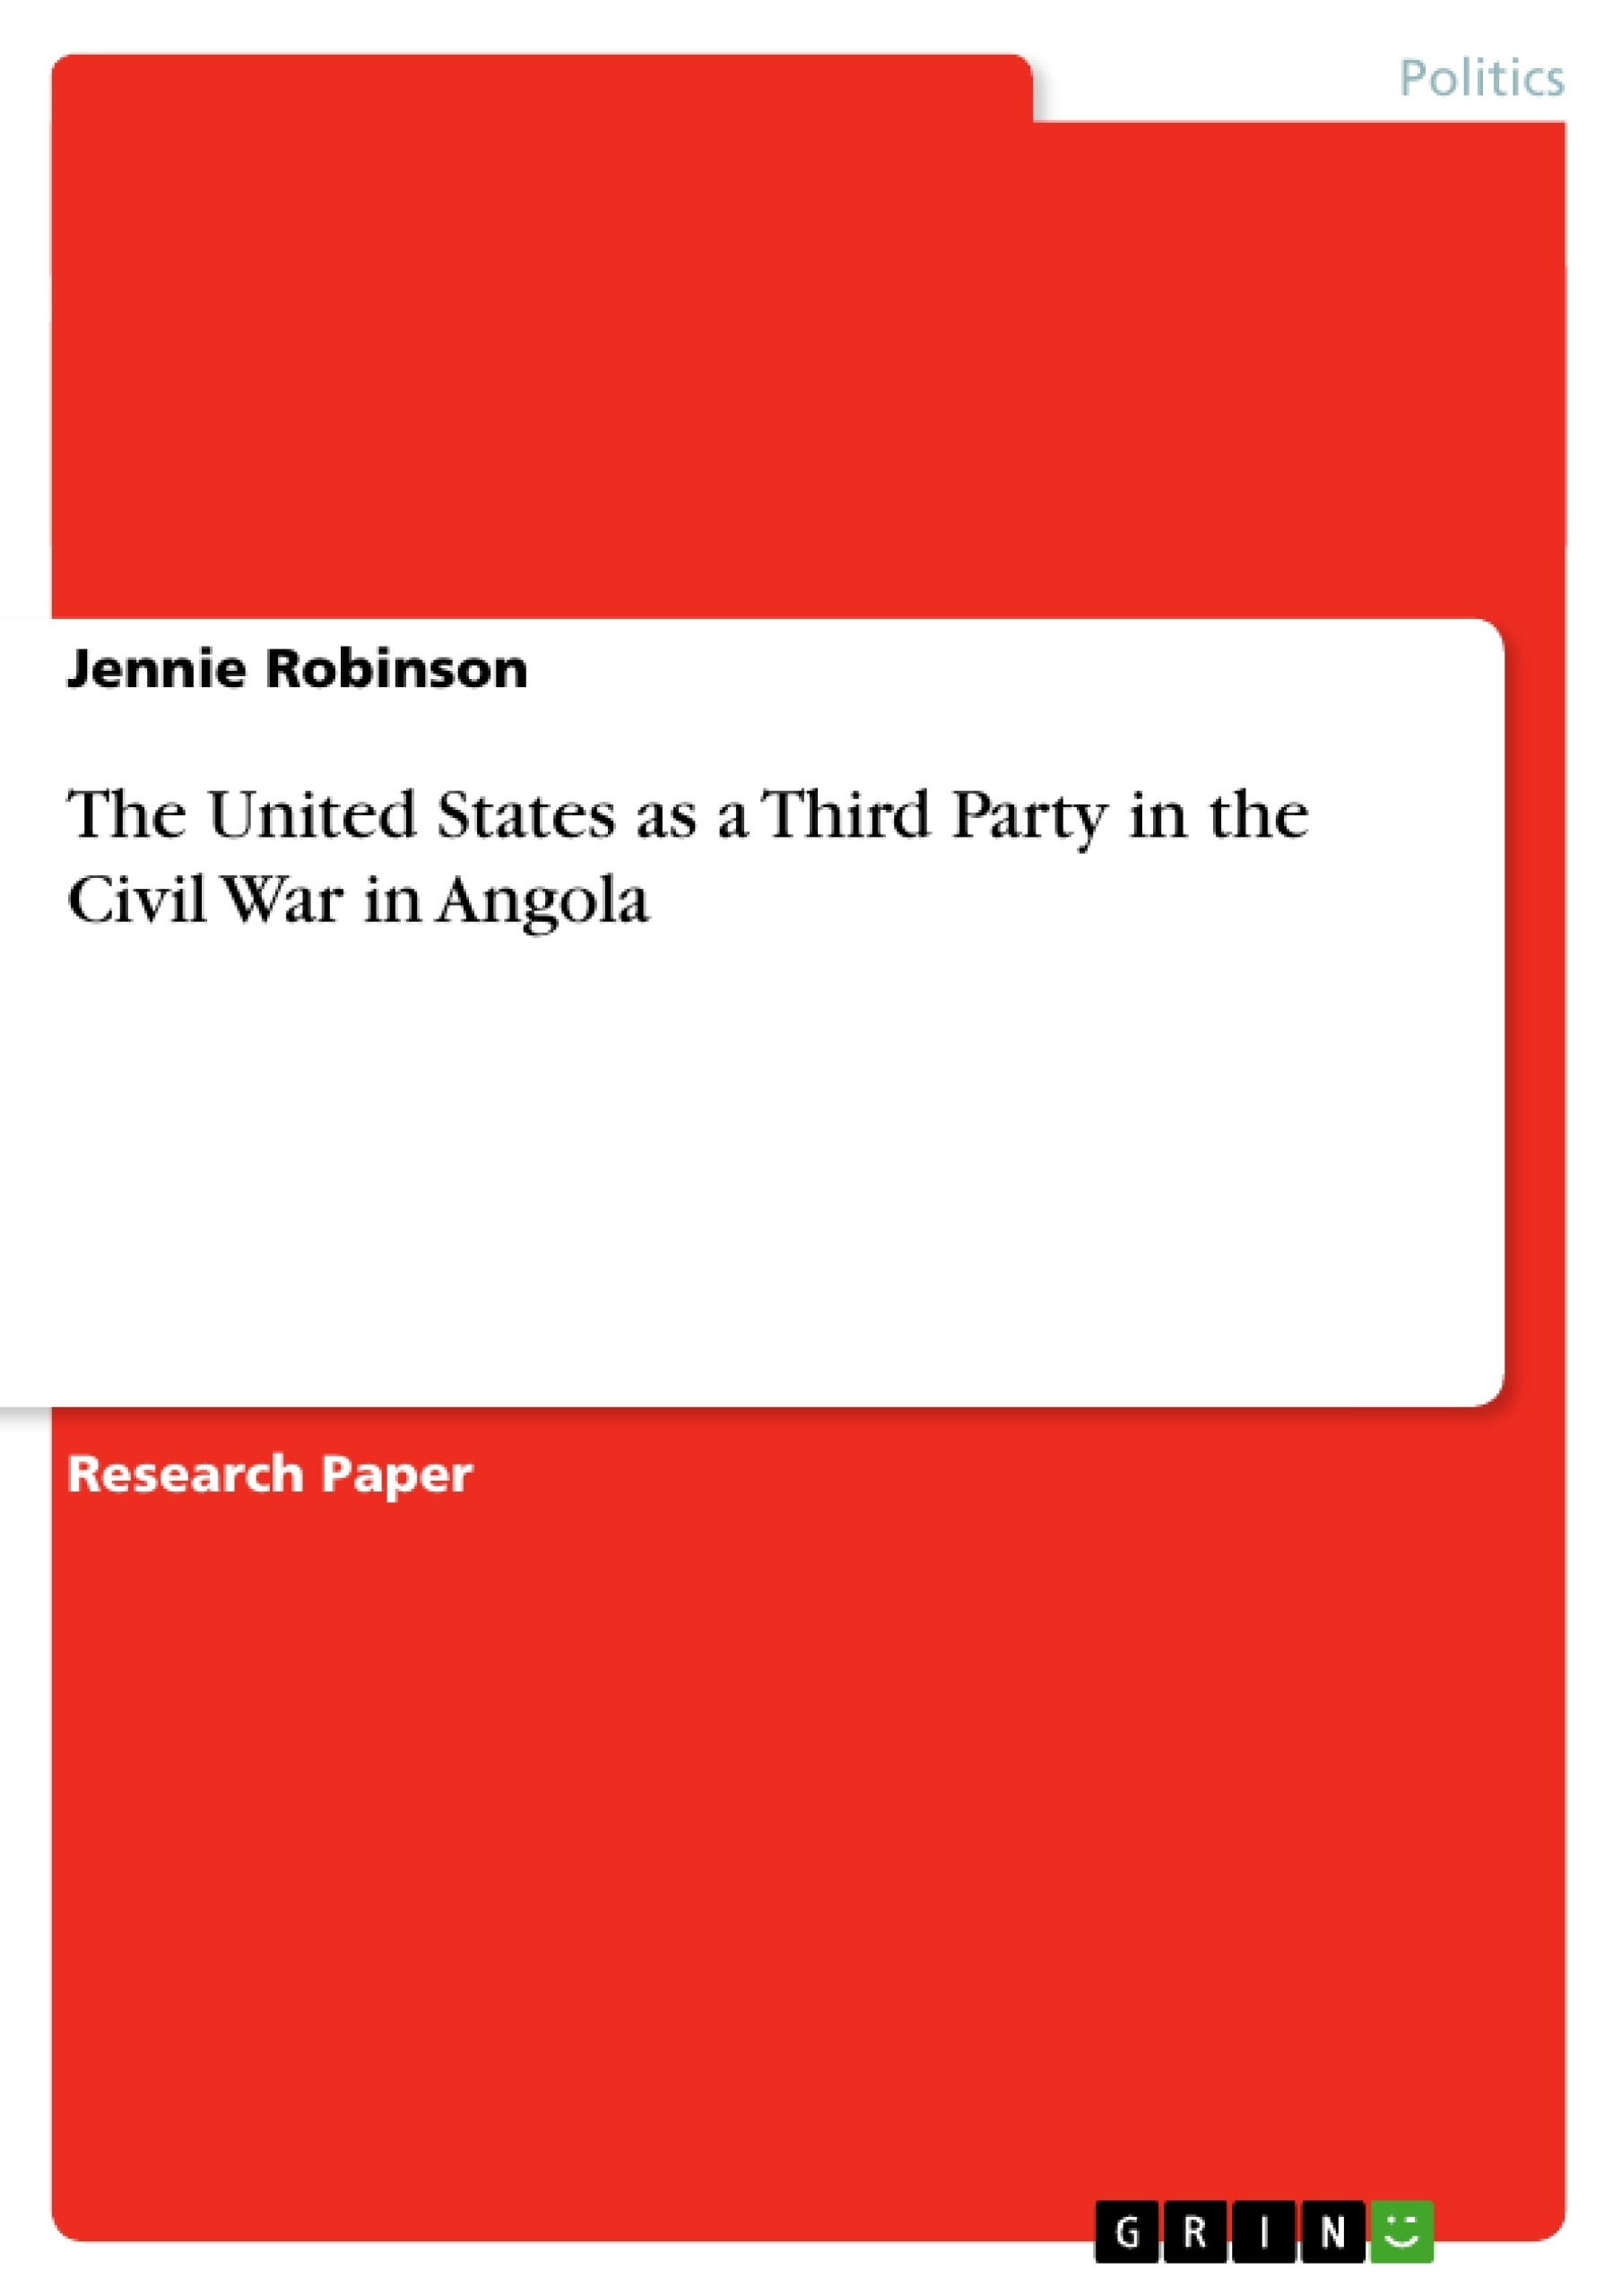 Título: The United States as a Third Party in the Civil War in Angola